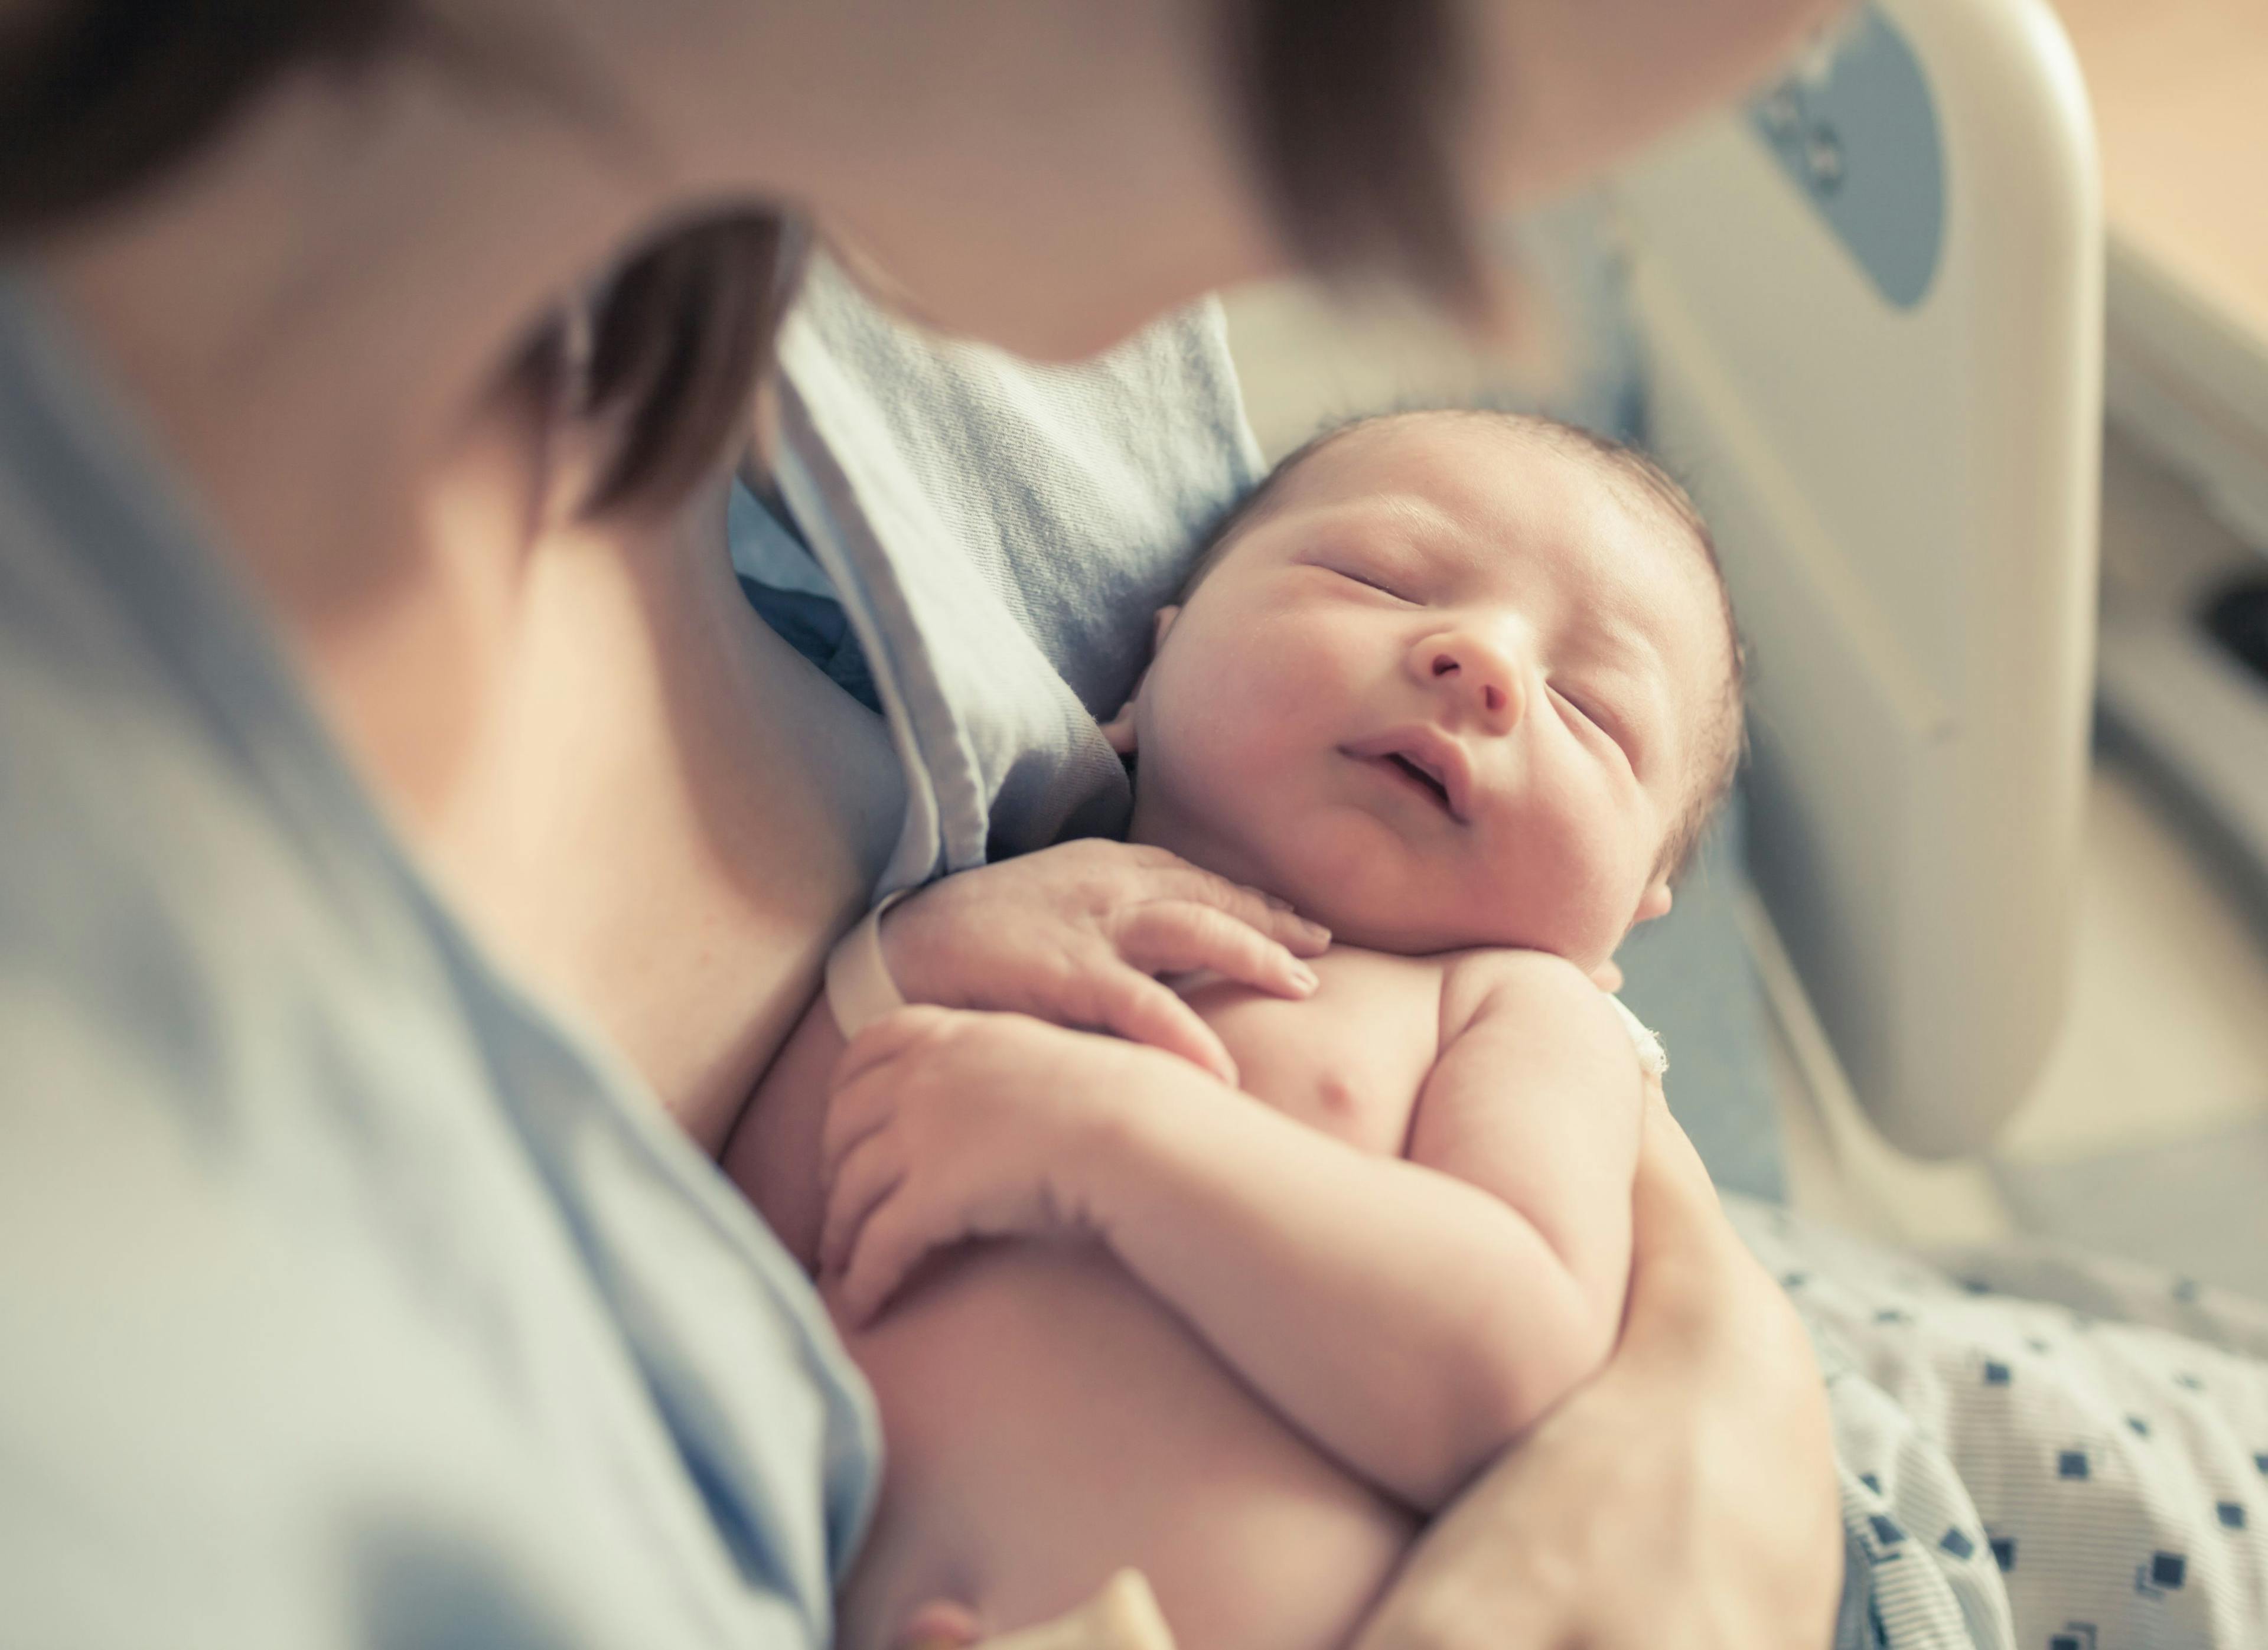 Enhanced Recovery Efforts for Cesarean Delivery Reduce Opioid Use by 80%